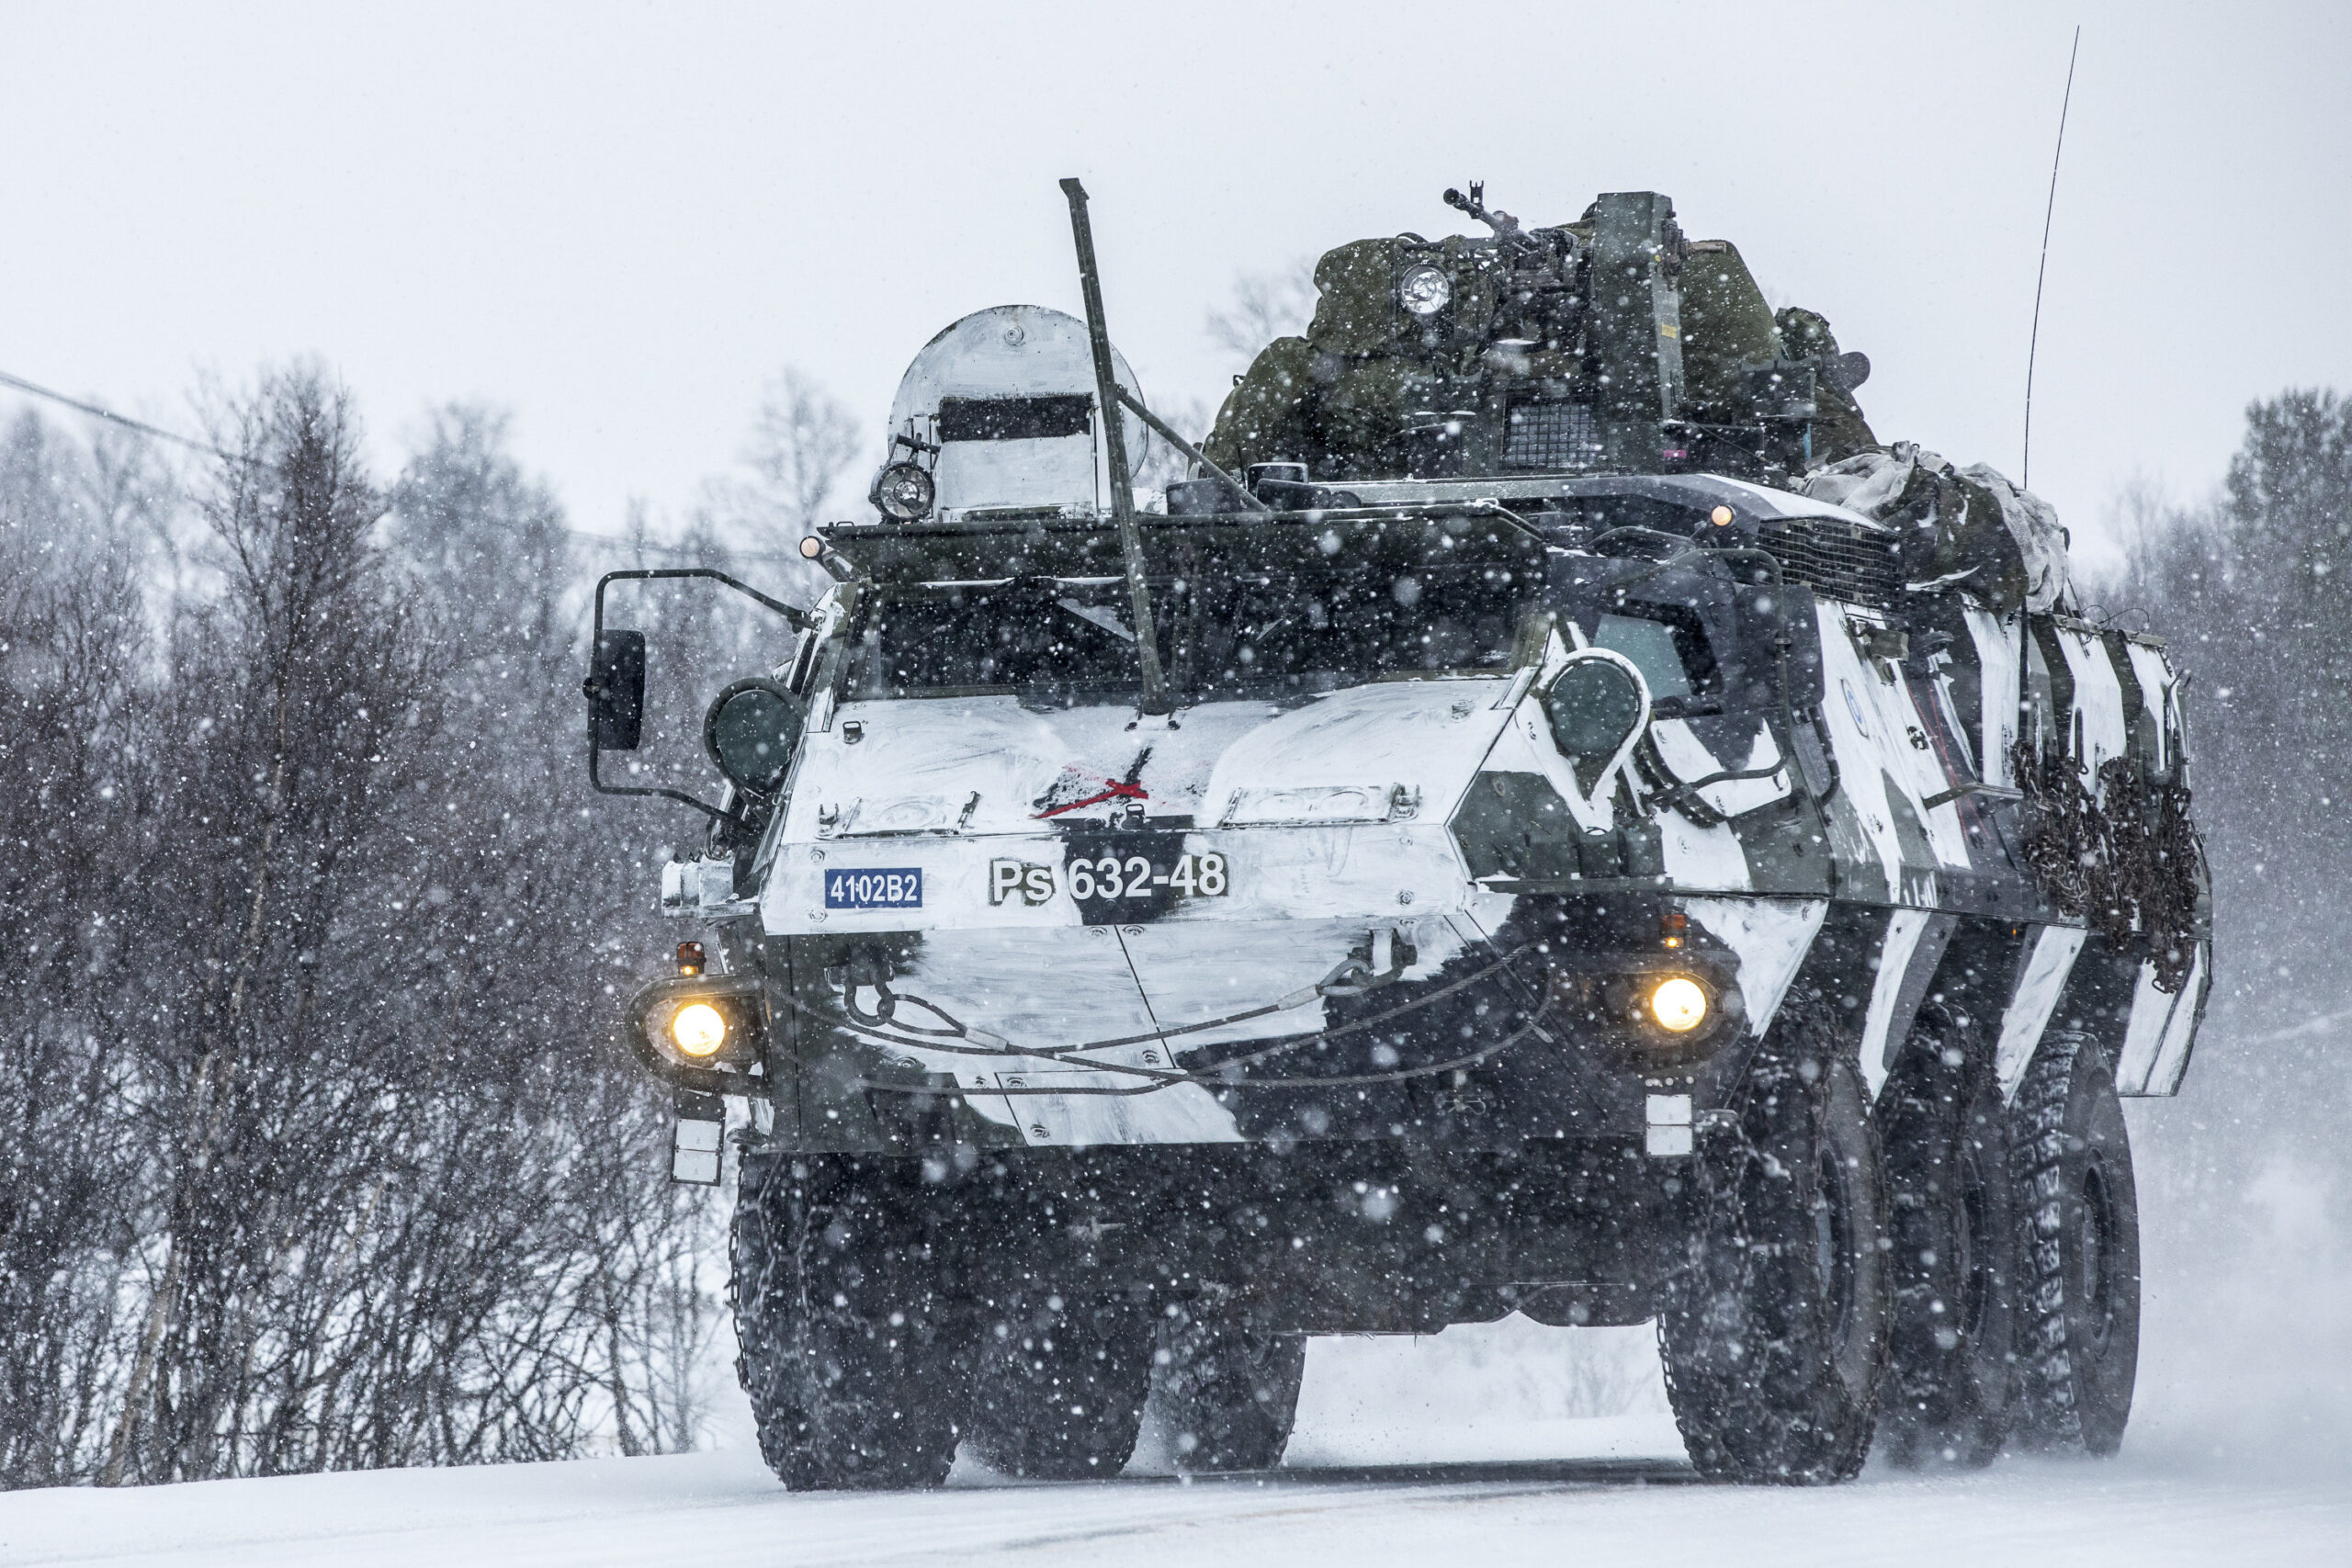 Finnish XA-203 armoured personnel carrier on a road march during exercise Trident Juncture 2018 in Norway on October 30, 2018. Trident Juncture 2018 is NATO’s largest exercise in many years, bringing together around 50,000 personnel from all 29 Allies, plus partners Finland and Sweden. Around 65 vessels, 250 aircraft and 10,000 vehicles will participate. Photo: Ville Multanen, Finnish Defence Forces Combat Camera